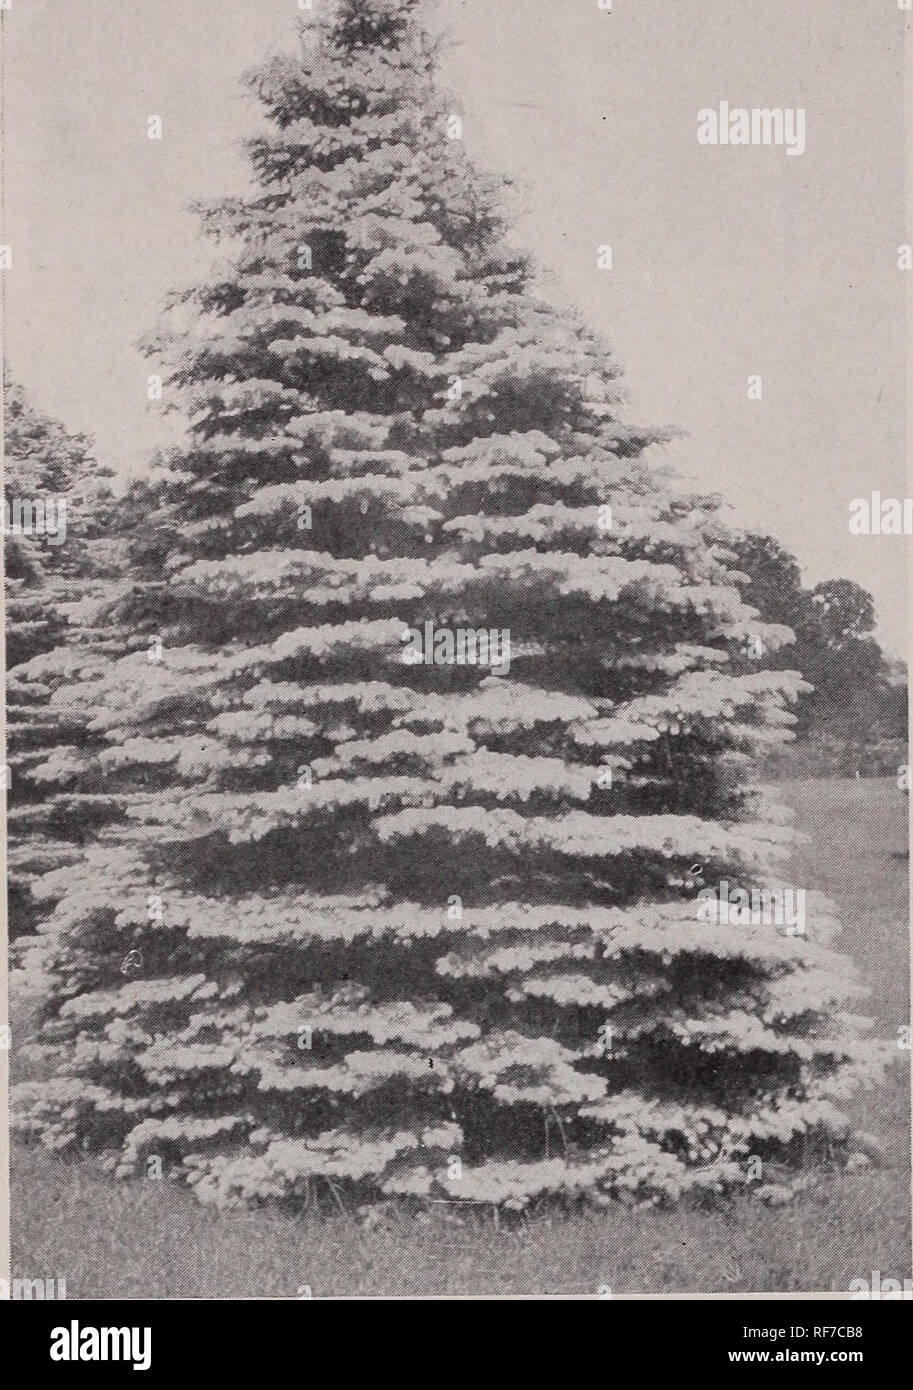 . Trees and hardy plants for all purposes. Nursery stock New York (State) New York Catalogs; Trees Seedlings Catalogs; Plants, Ornamental Catalogs; Shrubs Catalogs; Flowers Catalogs; Fruit Catalogs. 4 Our Leading Varieties and Specialties !. PICEA PUNGENS GLAUCA. (See page 6)'. Rosea. Japan Weeping Rose-Flowering Cherry. One of the finest flowering trees. A mass of rose colored flowers in early Spring. $i to $2. CERCIS CANADENSIS. Judas Tree or Red Bud. 50 cts. Low prices per 100. Japonica. Japan Judas Tree. One of the finest of the small flowering trees. 50 cts. CORNUS KOUSA. Japanese Dogwood Stock Photo